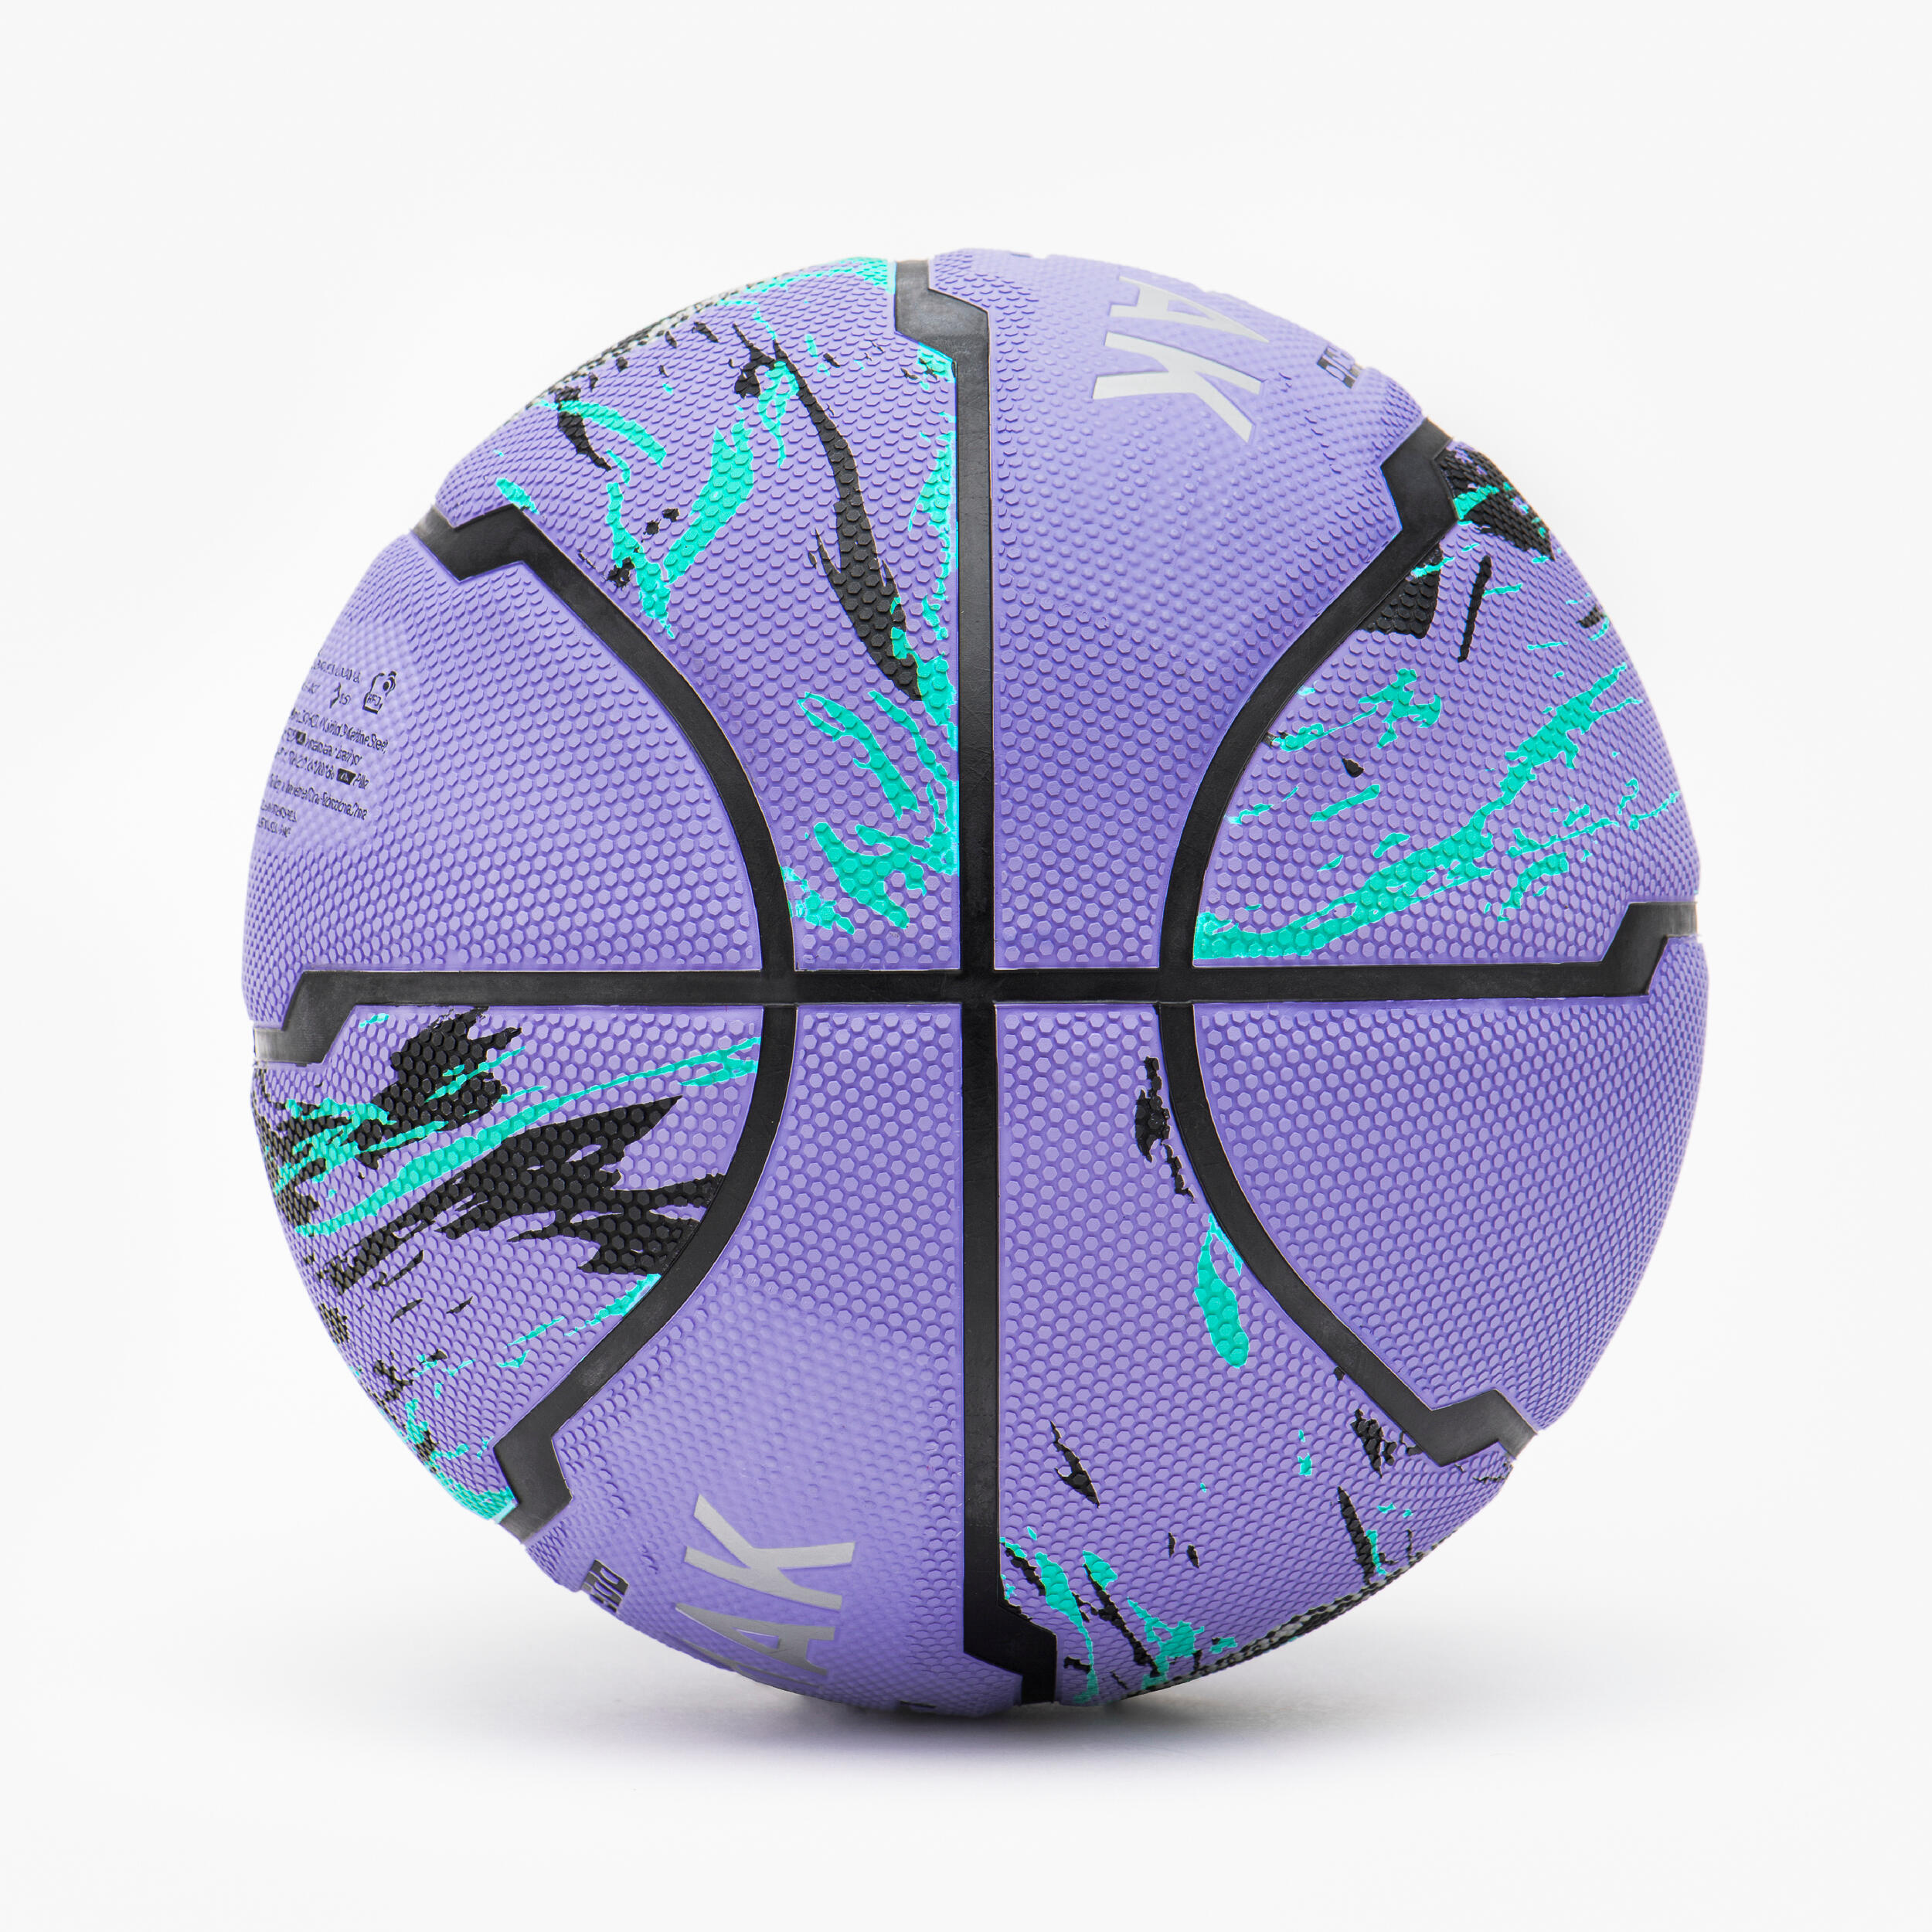 Basketball Size 6 R500 - Purple/Turquoise 3/4